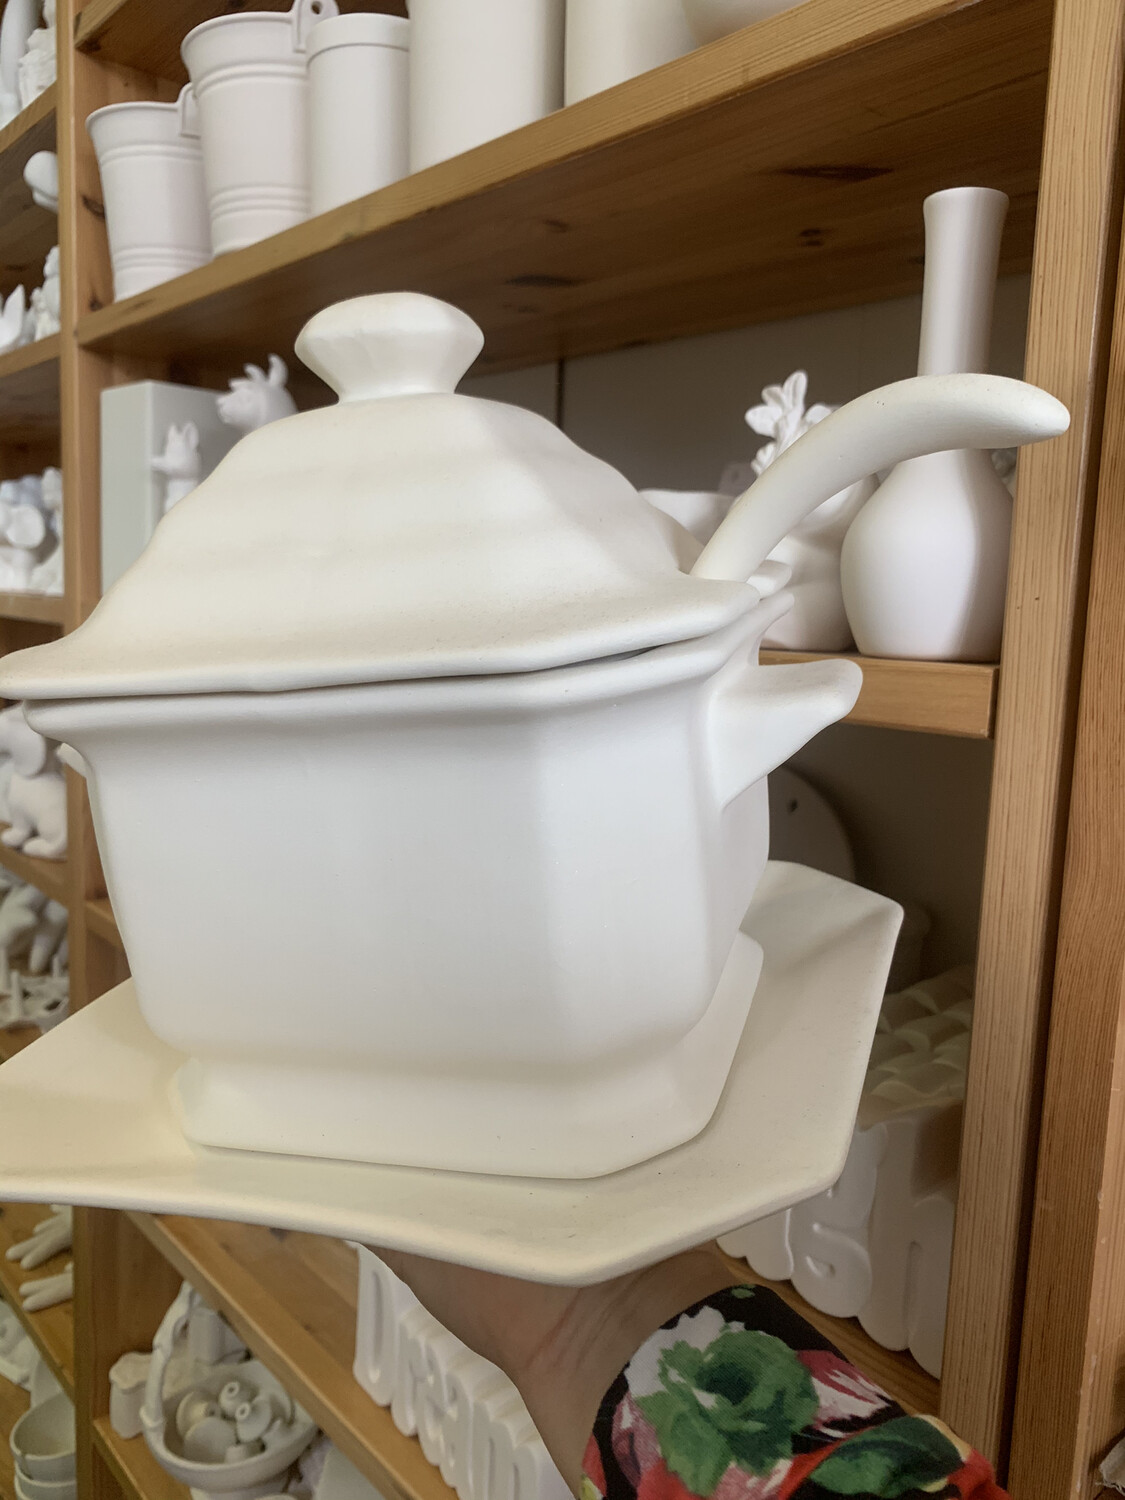 Paint Your Own Pottery - Ceramic
Soup Tureen Server With Ladle And Base Painting Kit